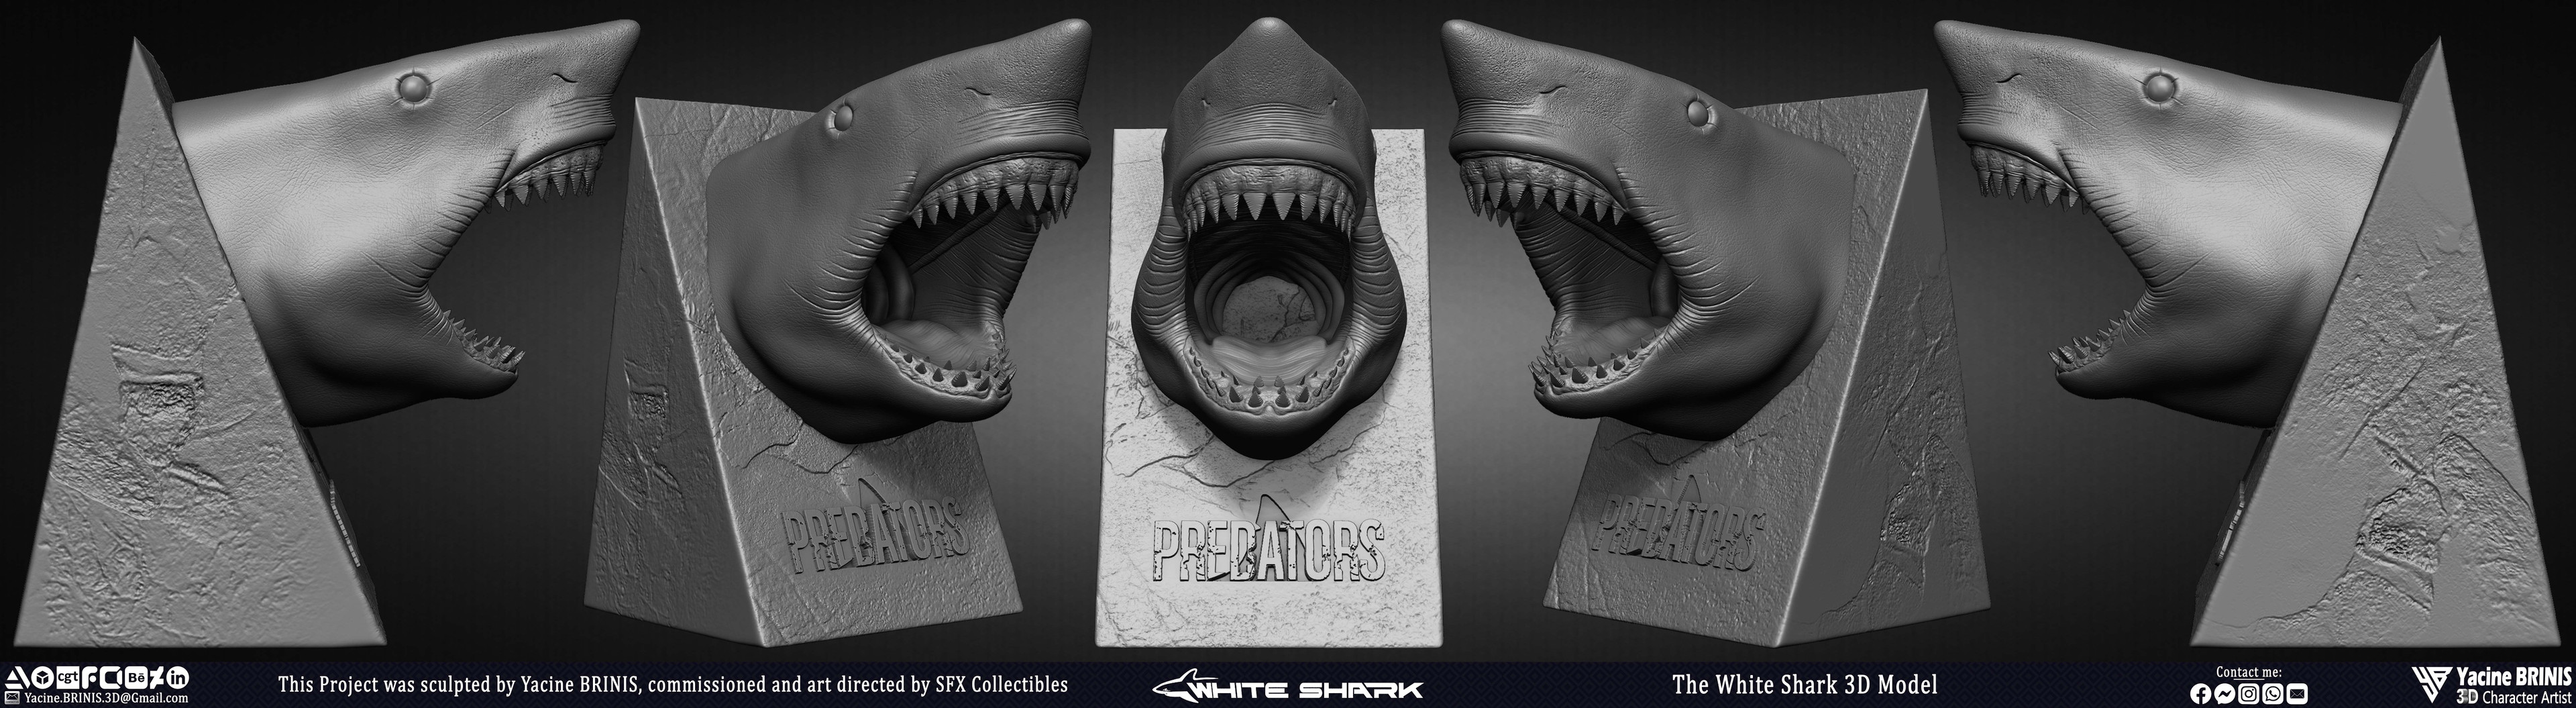 The White Shark Discovery sculpted by Yacine BRINIS 001